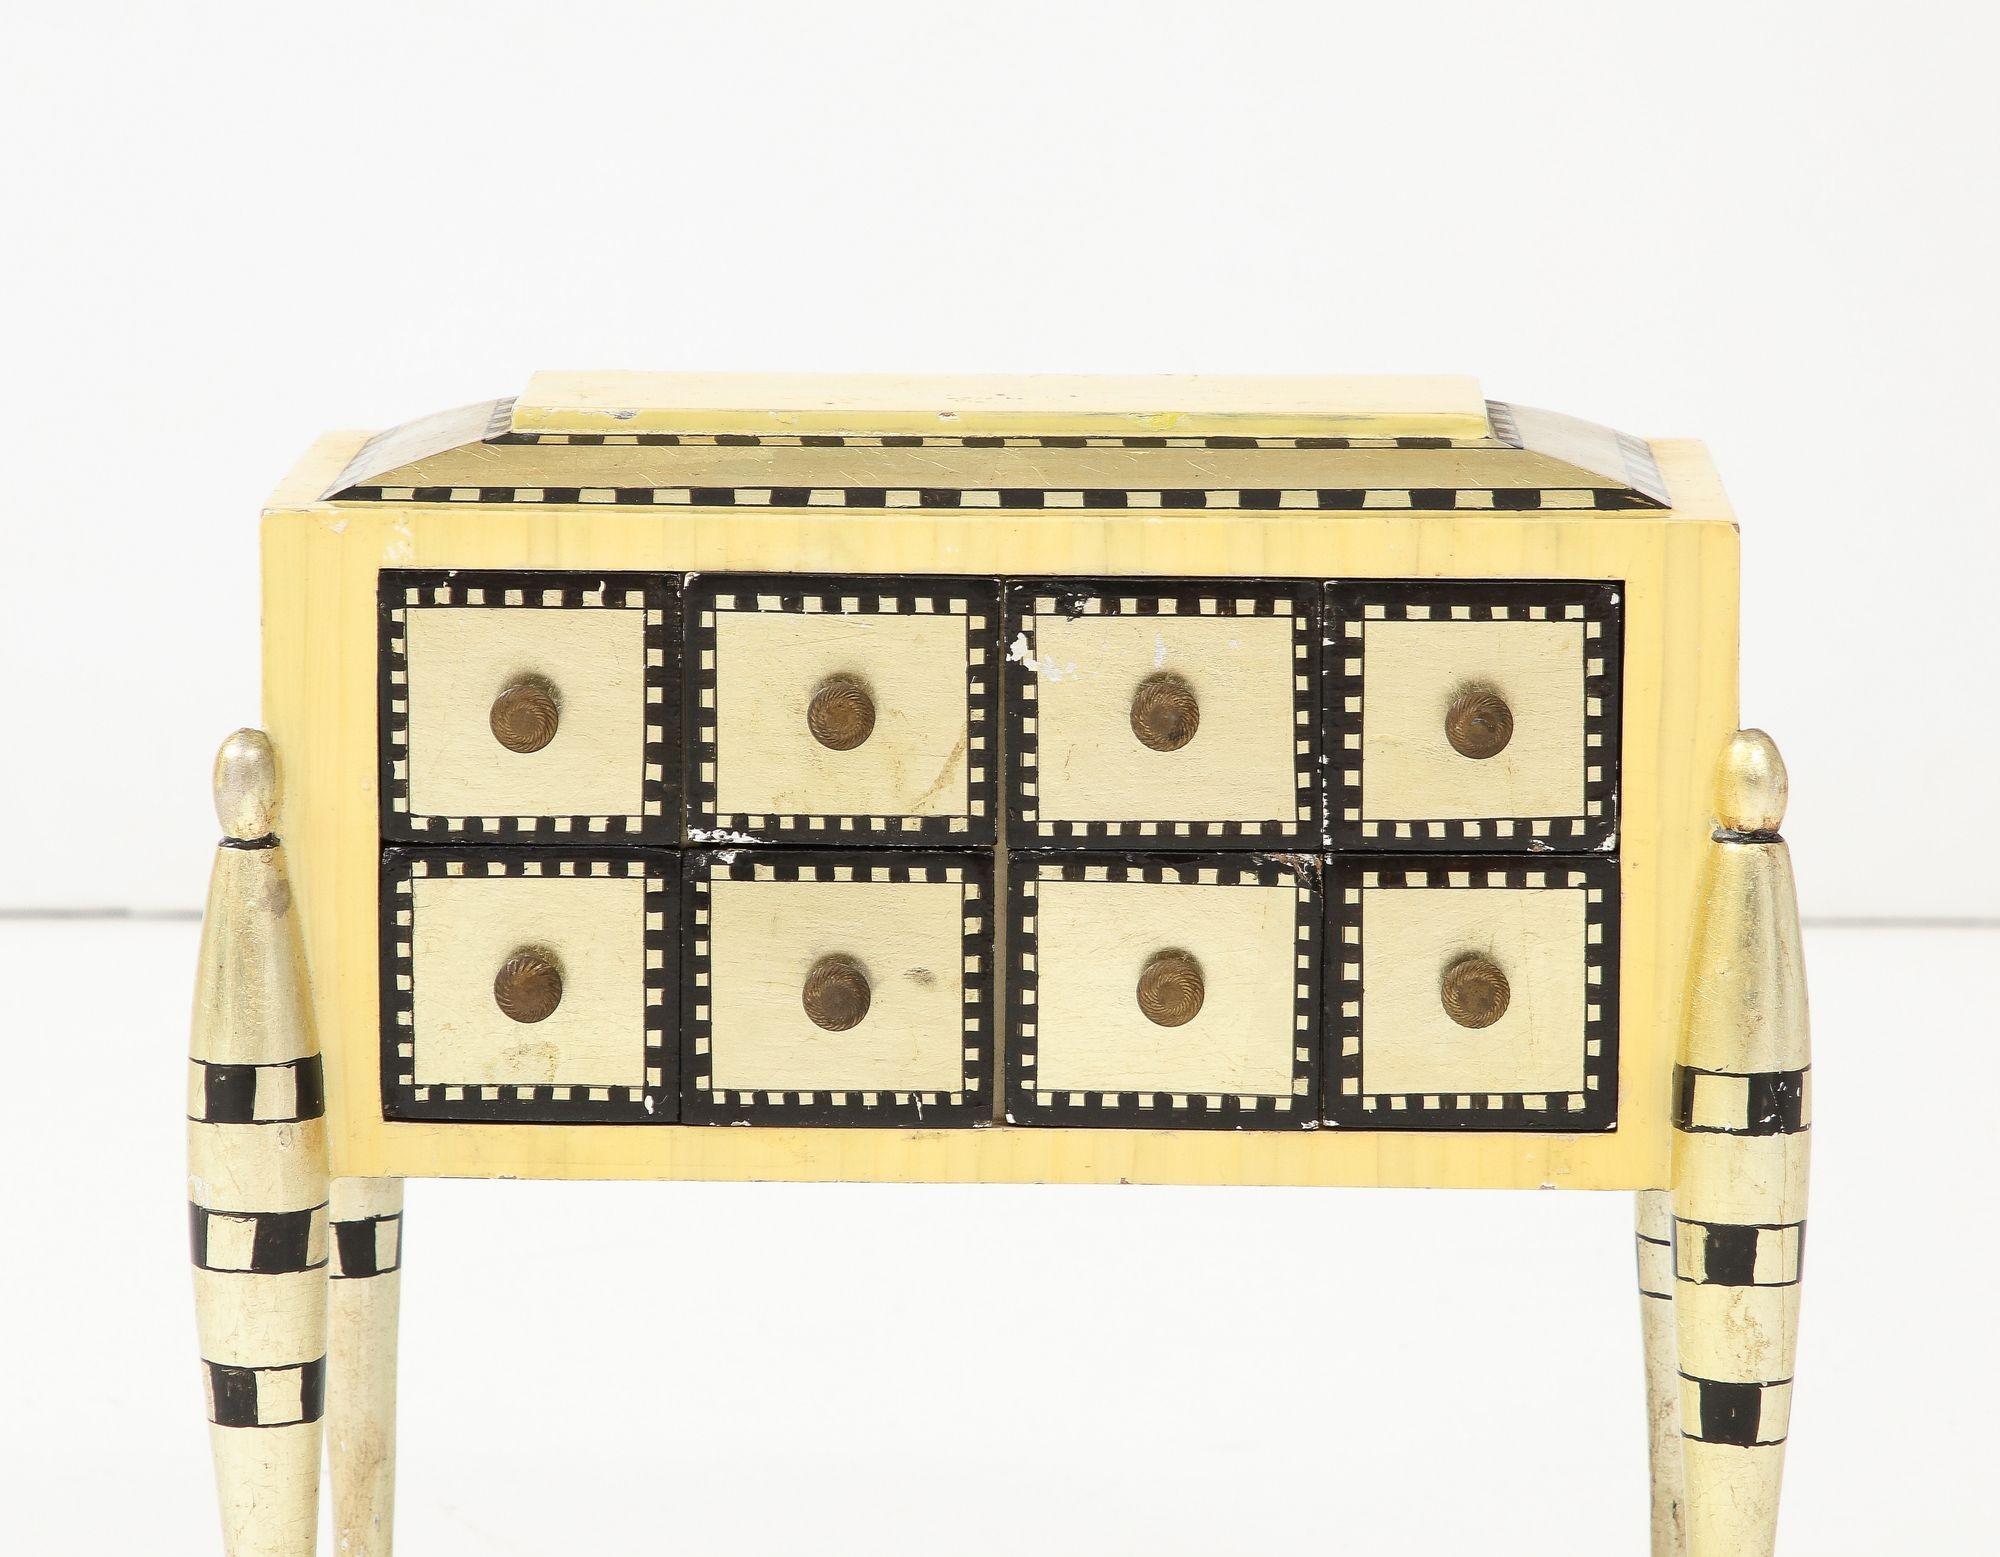 A delicate Wooden Jewelry Box with multiple draws and wood handles gilded and lacquered.